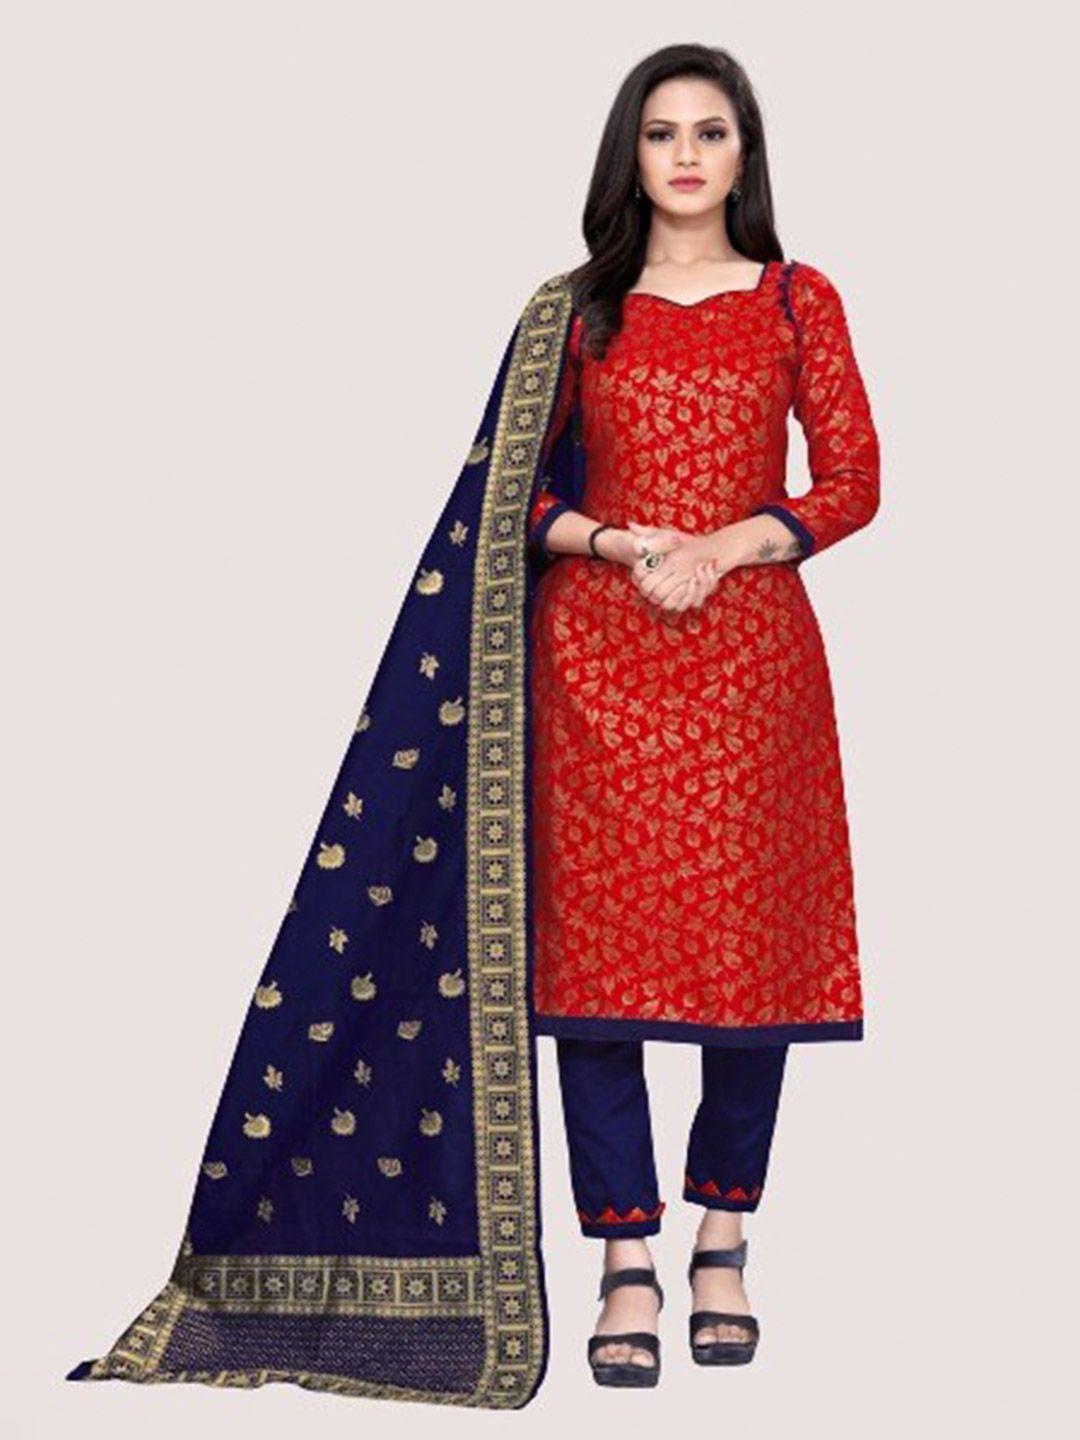 morly women red & navy blue dupion silk unstitched dress material